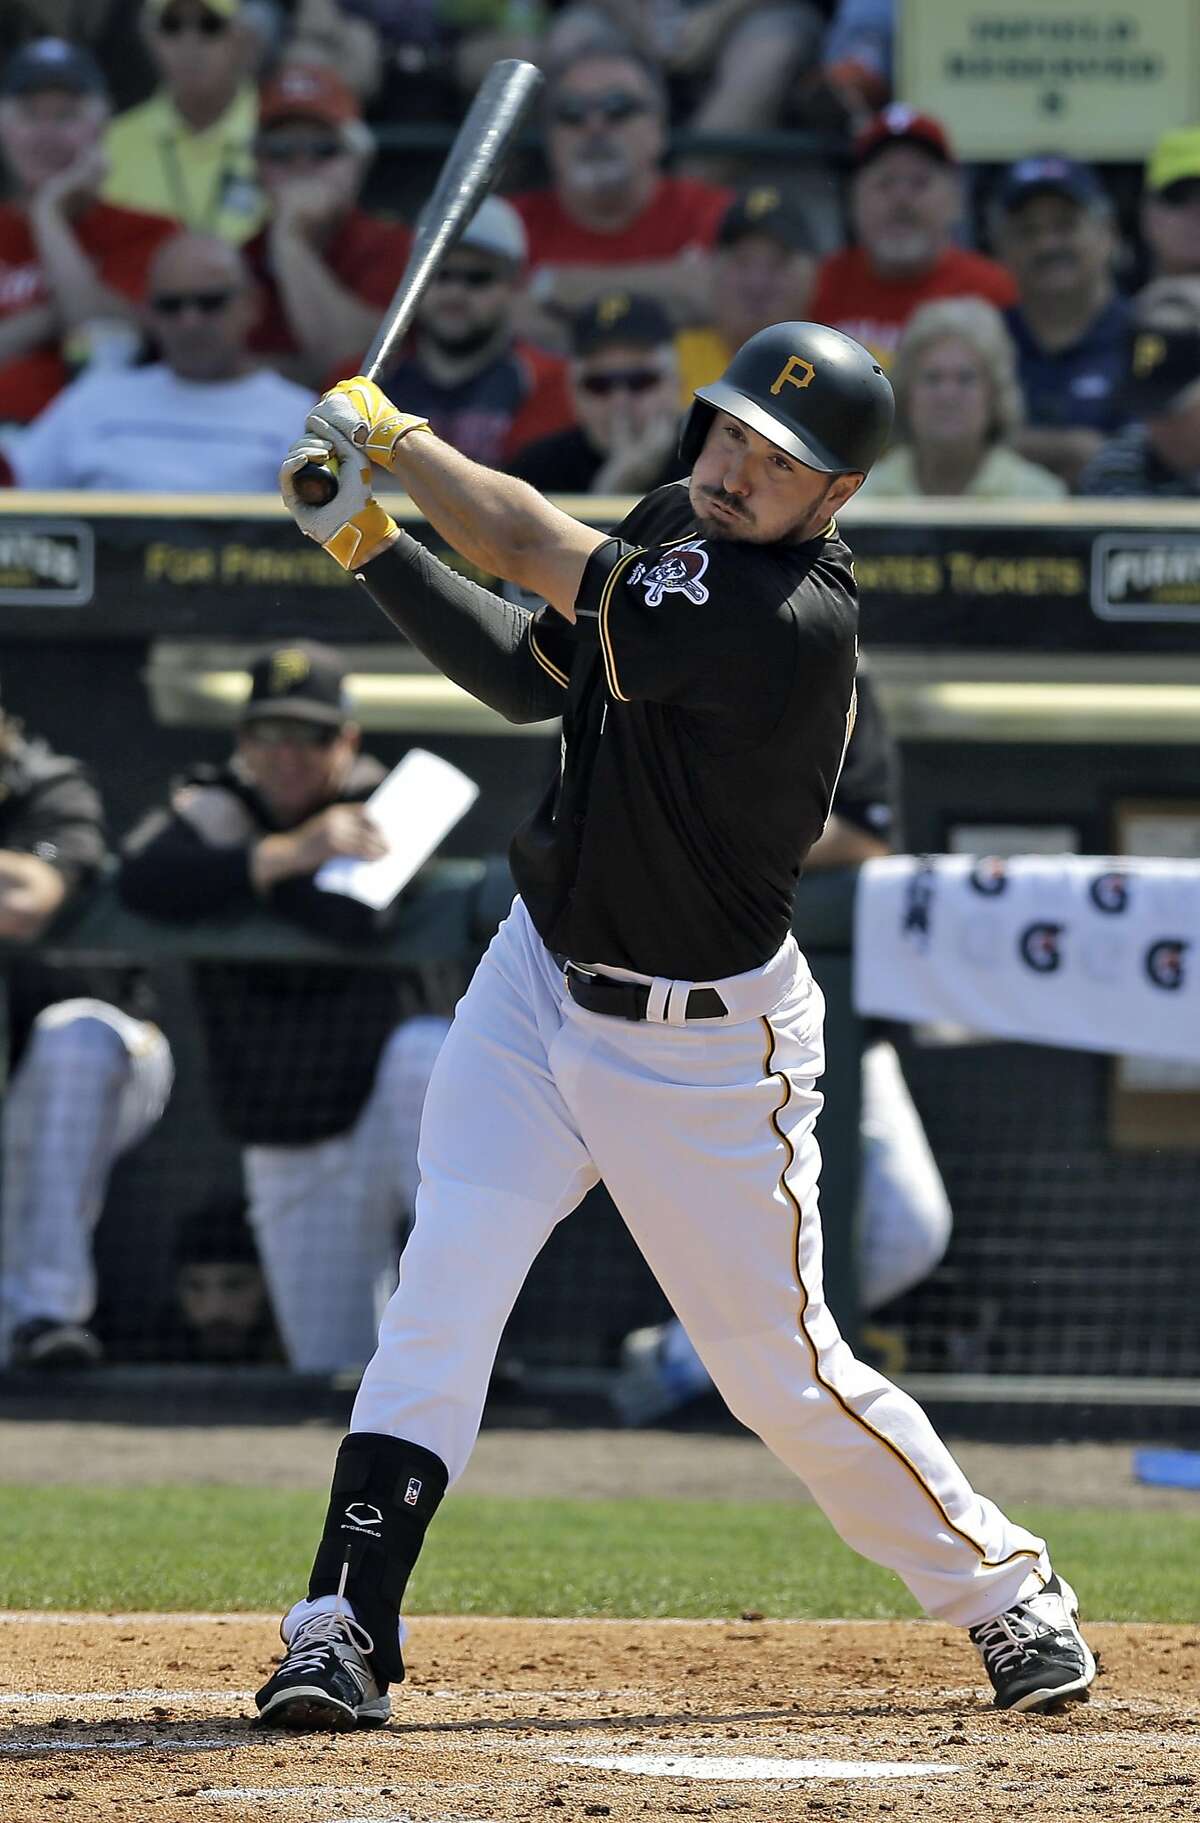 Pittsburgh Pirates' Matt Joyce bats against the Philadelphia Phillies during the third inning of a spring training baseball game Monday, March 7, 2016, in Tampa, Fla. (AP Photo/Chris O'Meara)